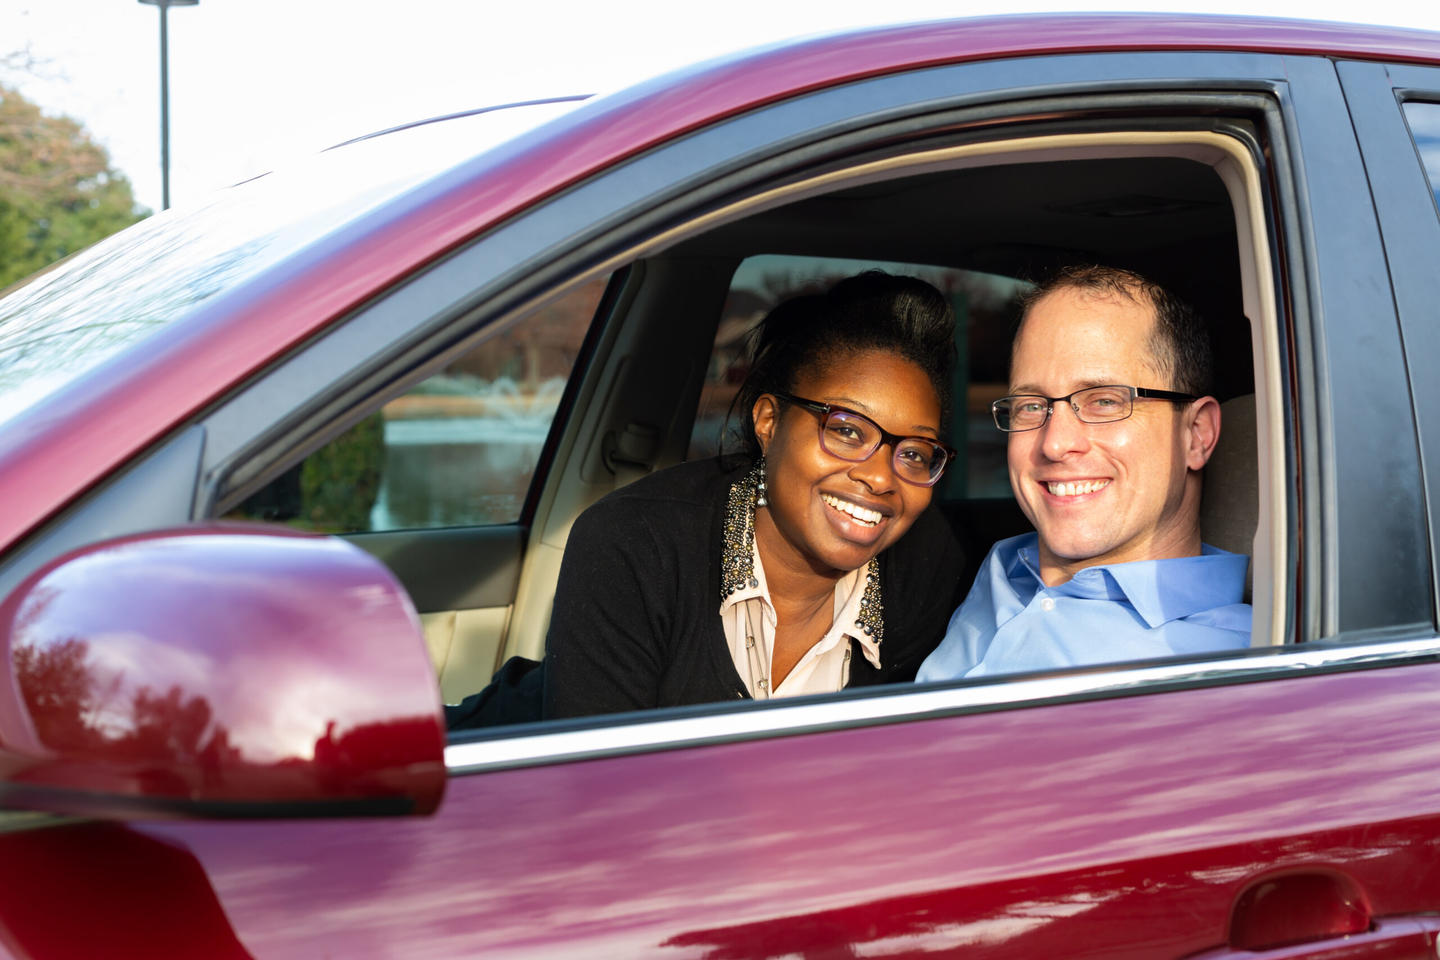 Woman and man in a car smiling